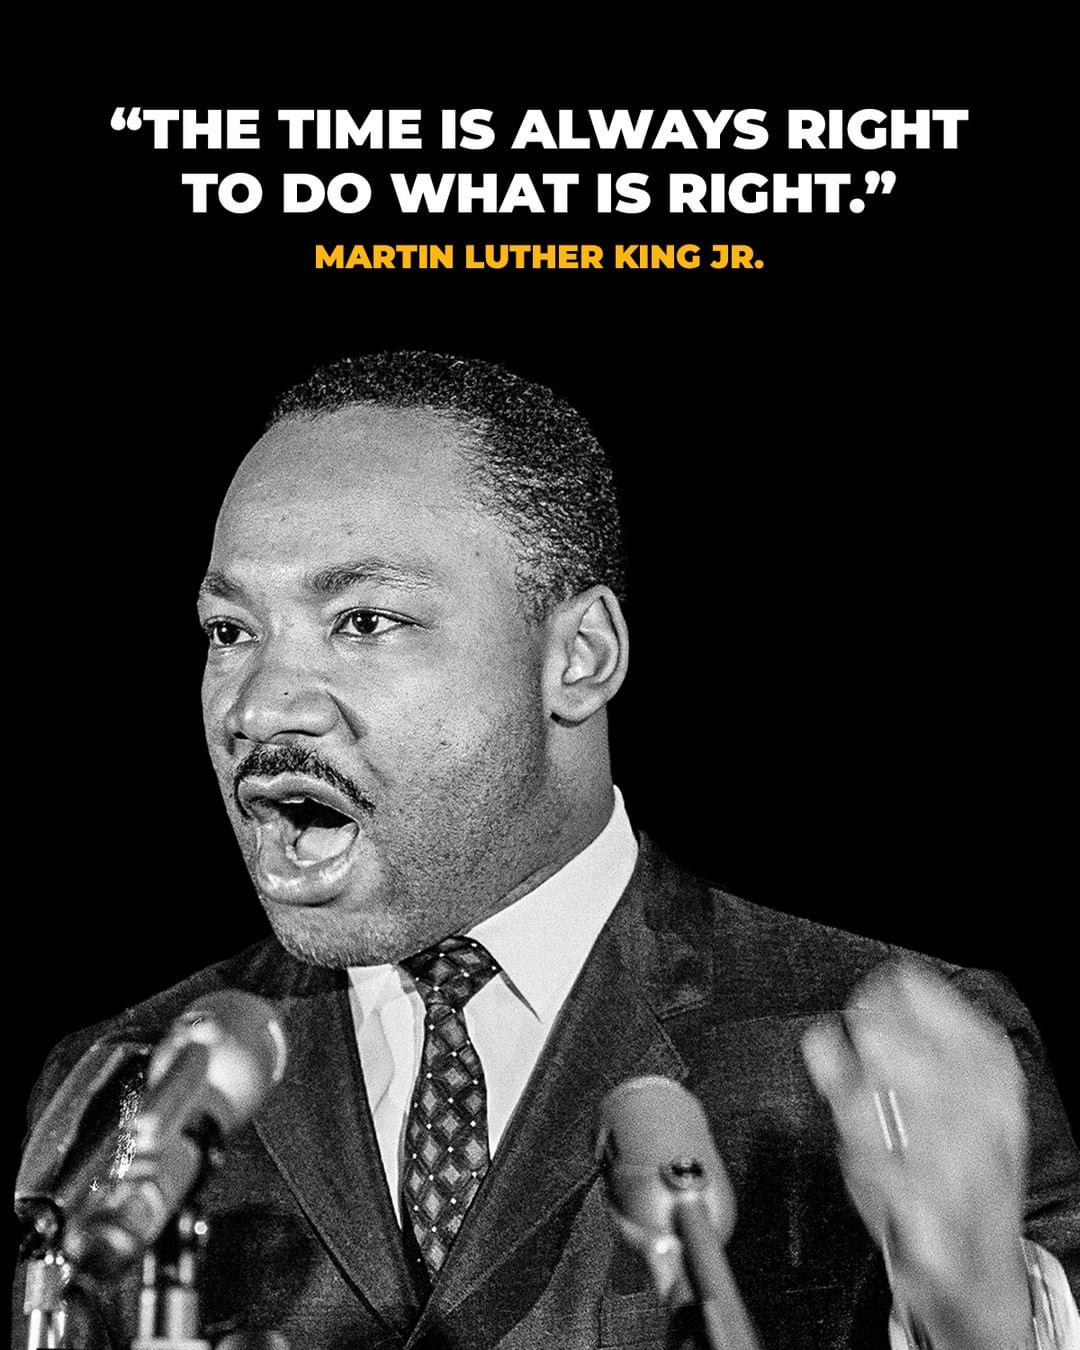 Today, we celebrate and remember the life and legacy of Martin Luther King Jr. #...